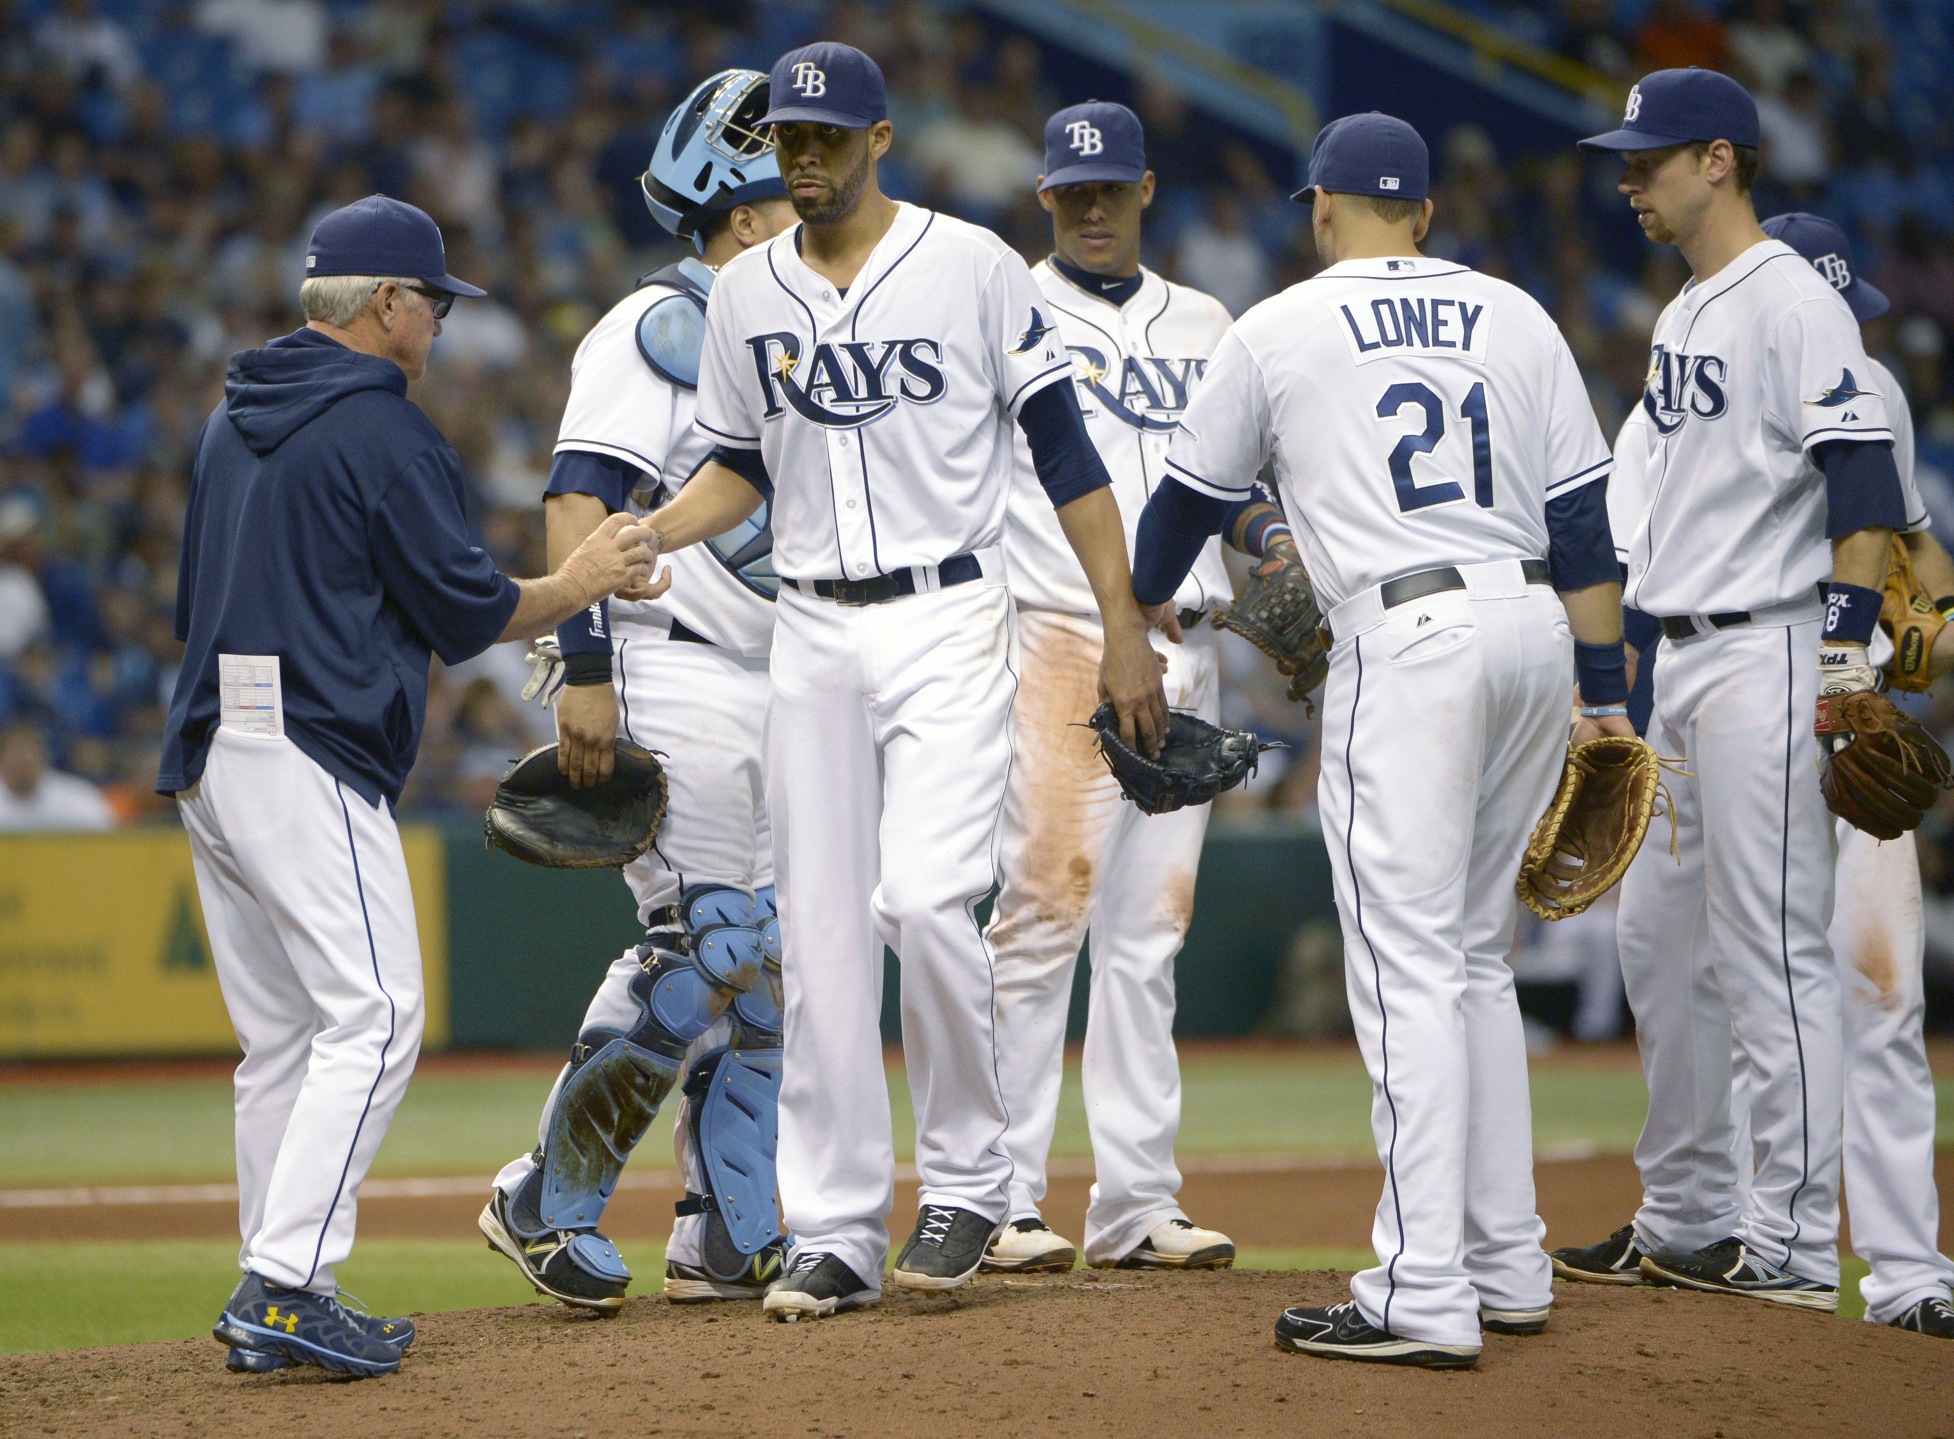 Manager Joe Maddon praises Tampa Bay Rays players for achieving 90 regular-season wins for the fourth year in a row. Photo: AP